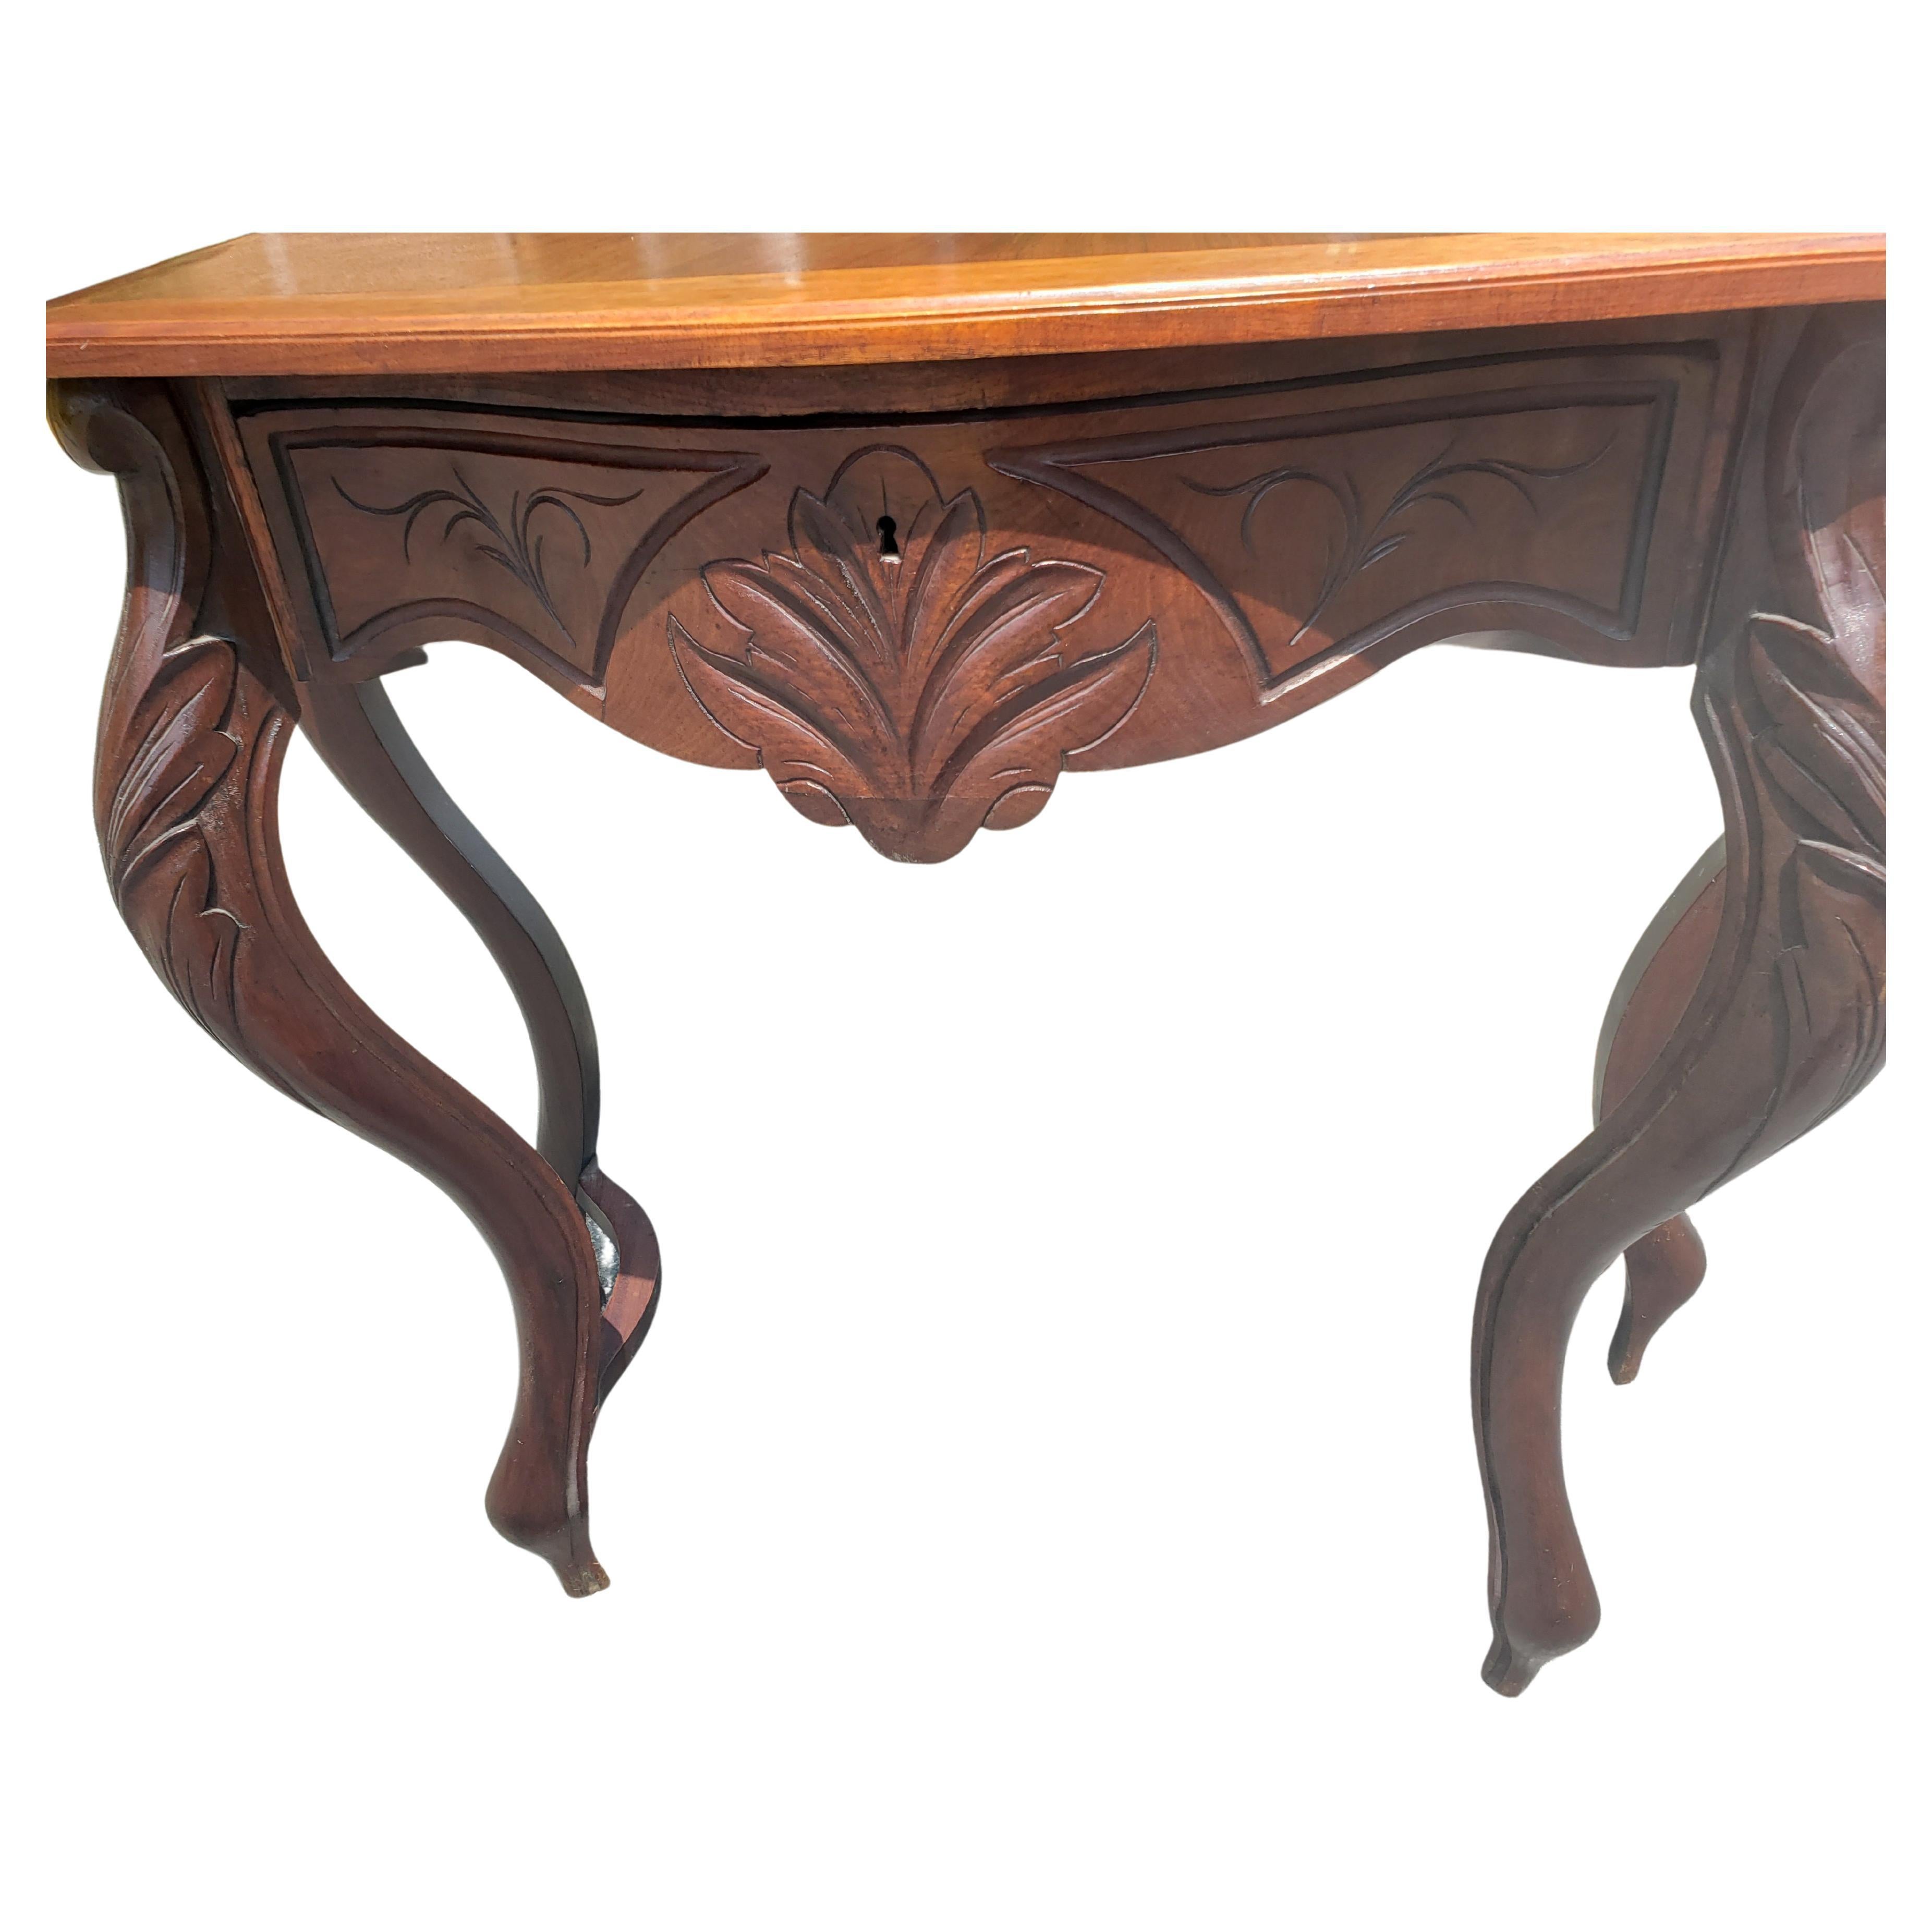 Victorian Rococo Style One Drawer Mahogany Console Table, circa 1890s In Good Condition For Sale In Germantown, MD